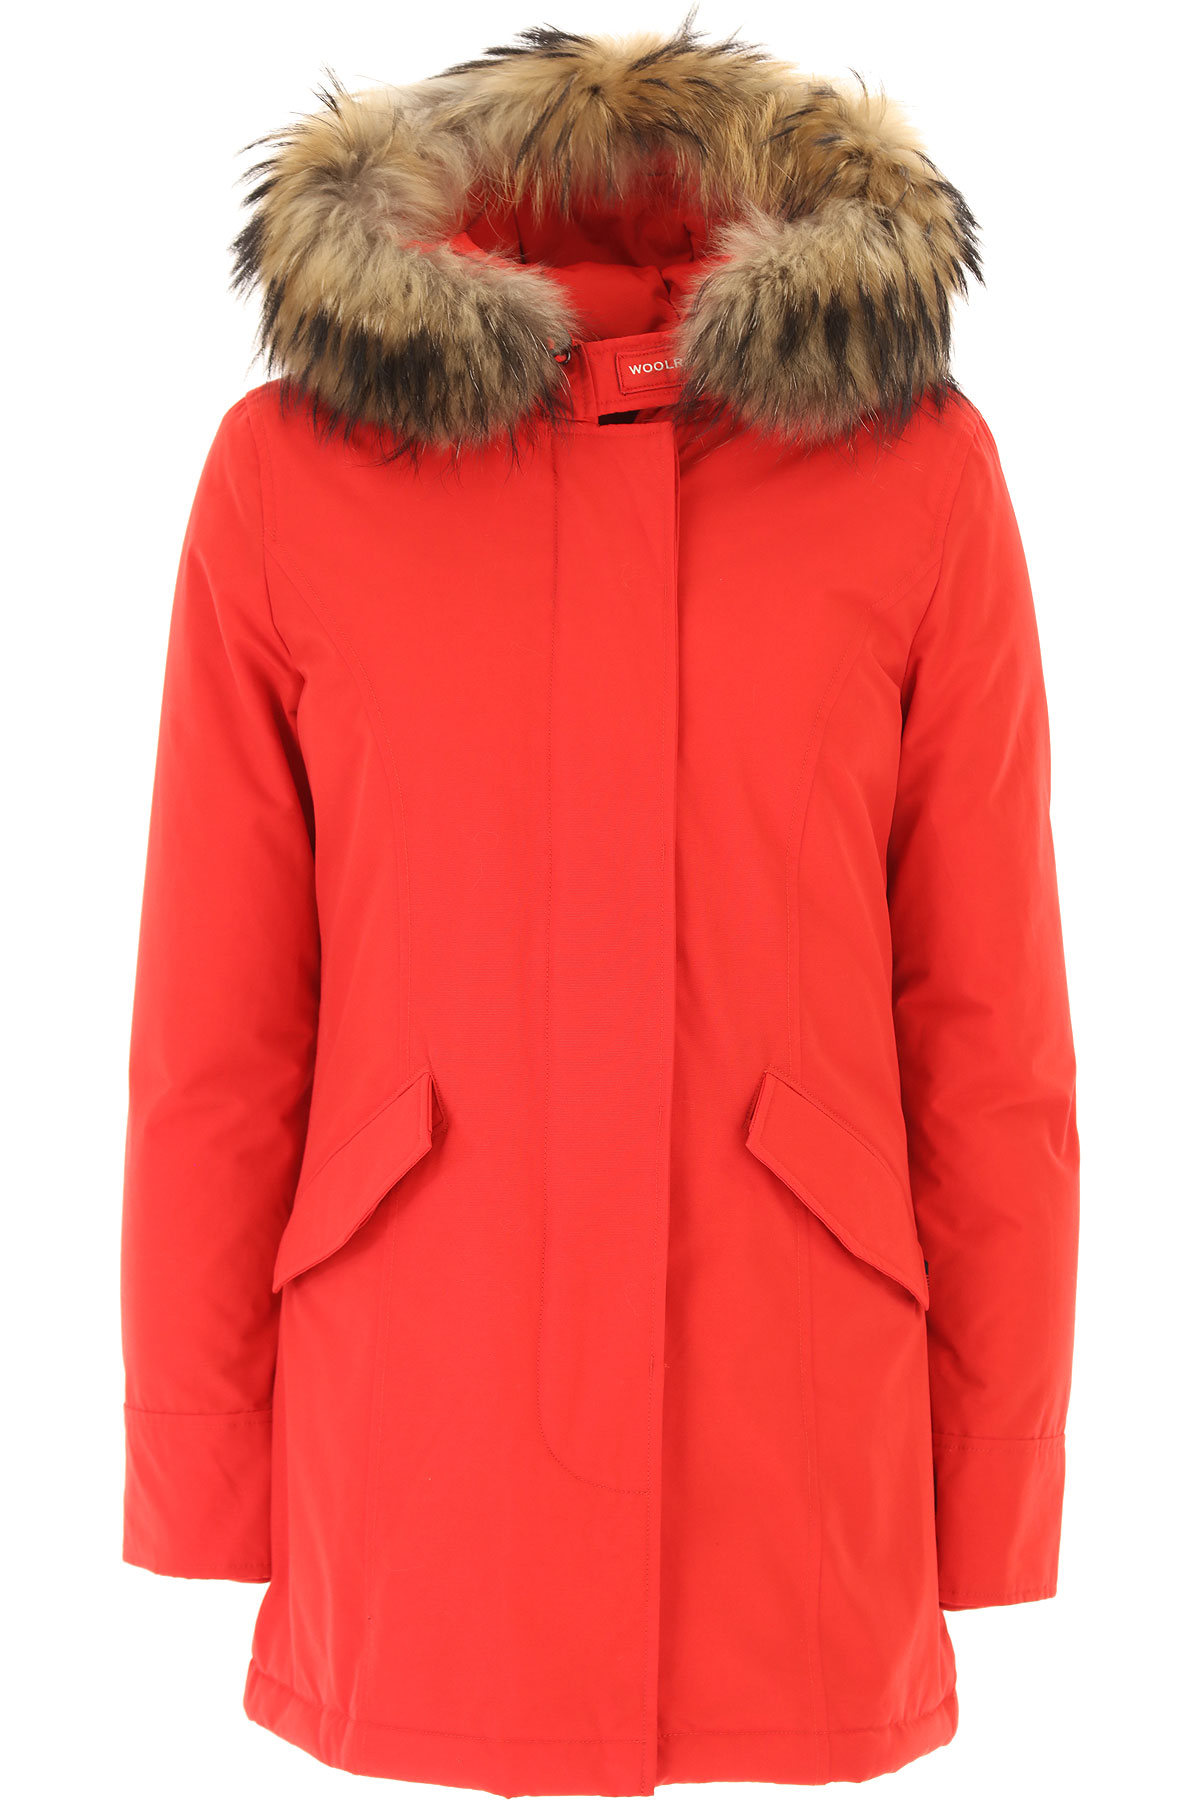 Woolrich Down Jacket for Women, Puffer Ski Jacket, Red, Down, 2021, 2 |  AccuWeather Shop